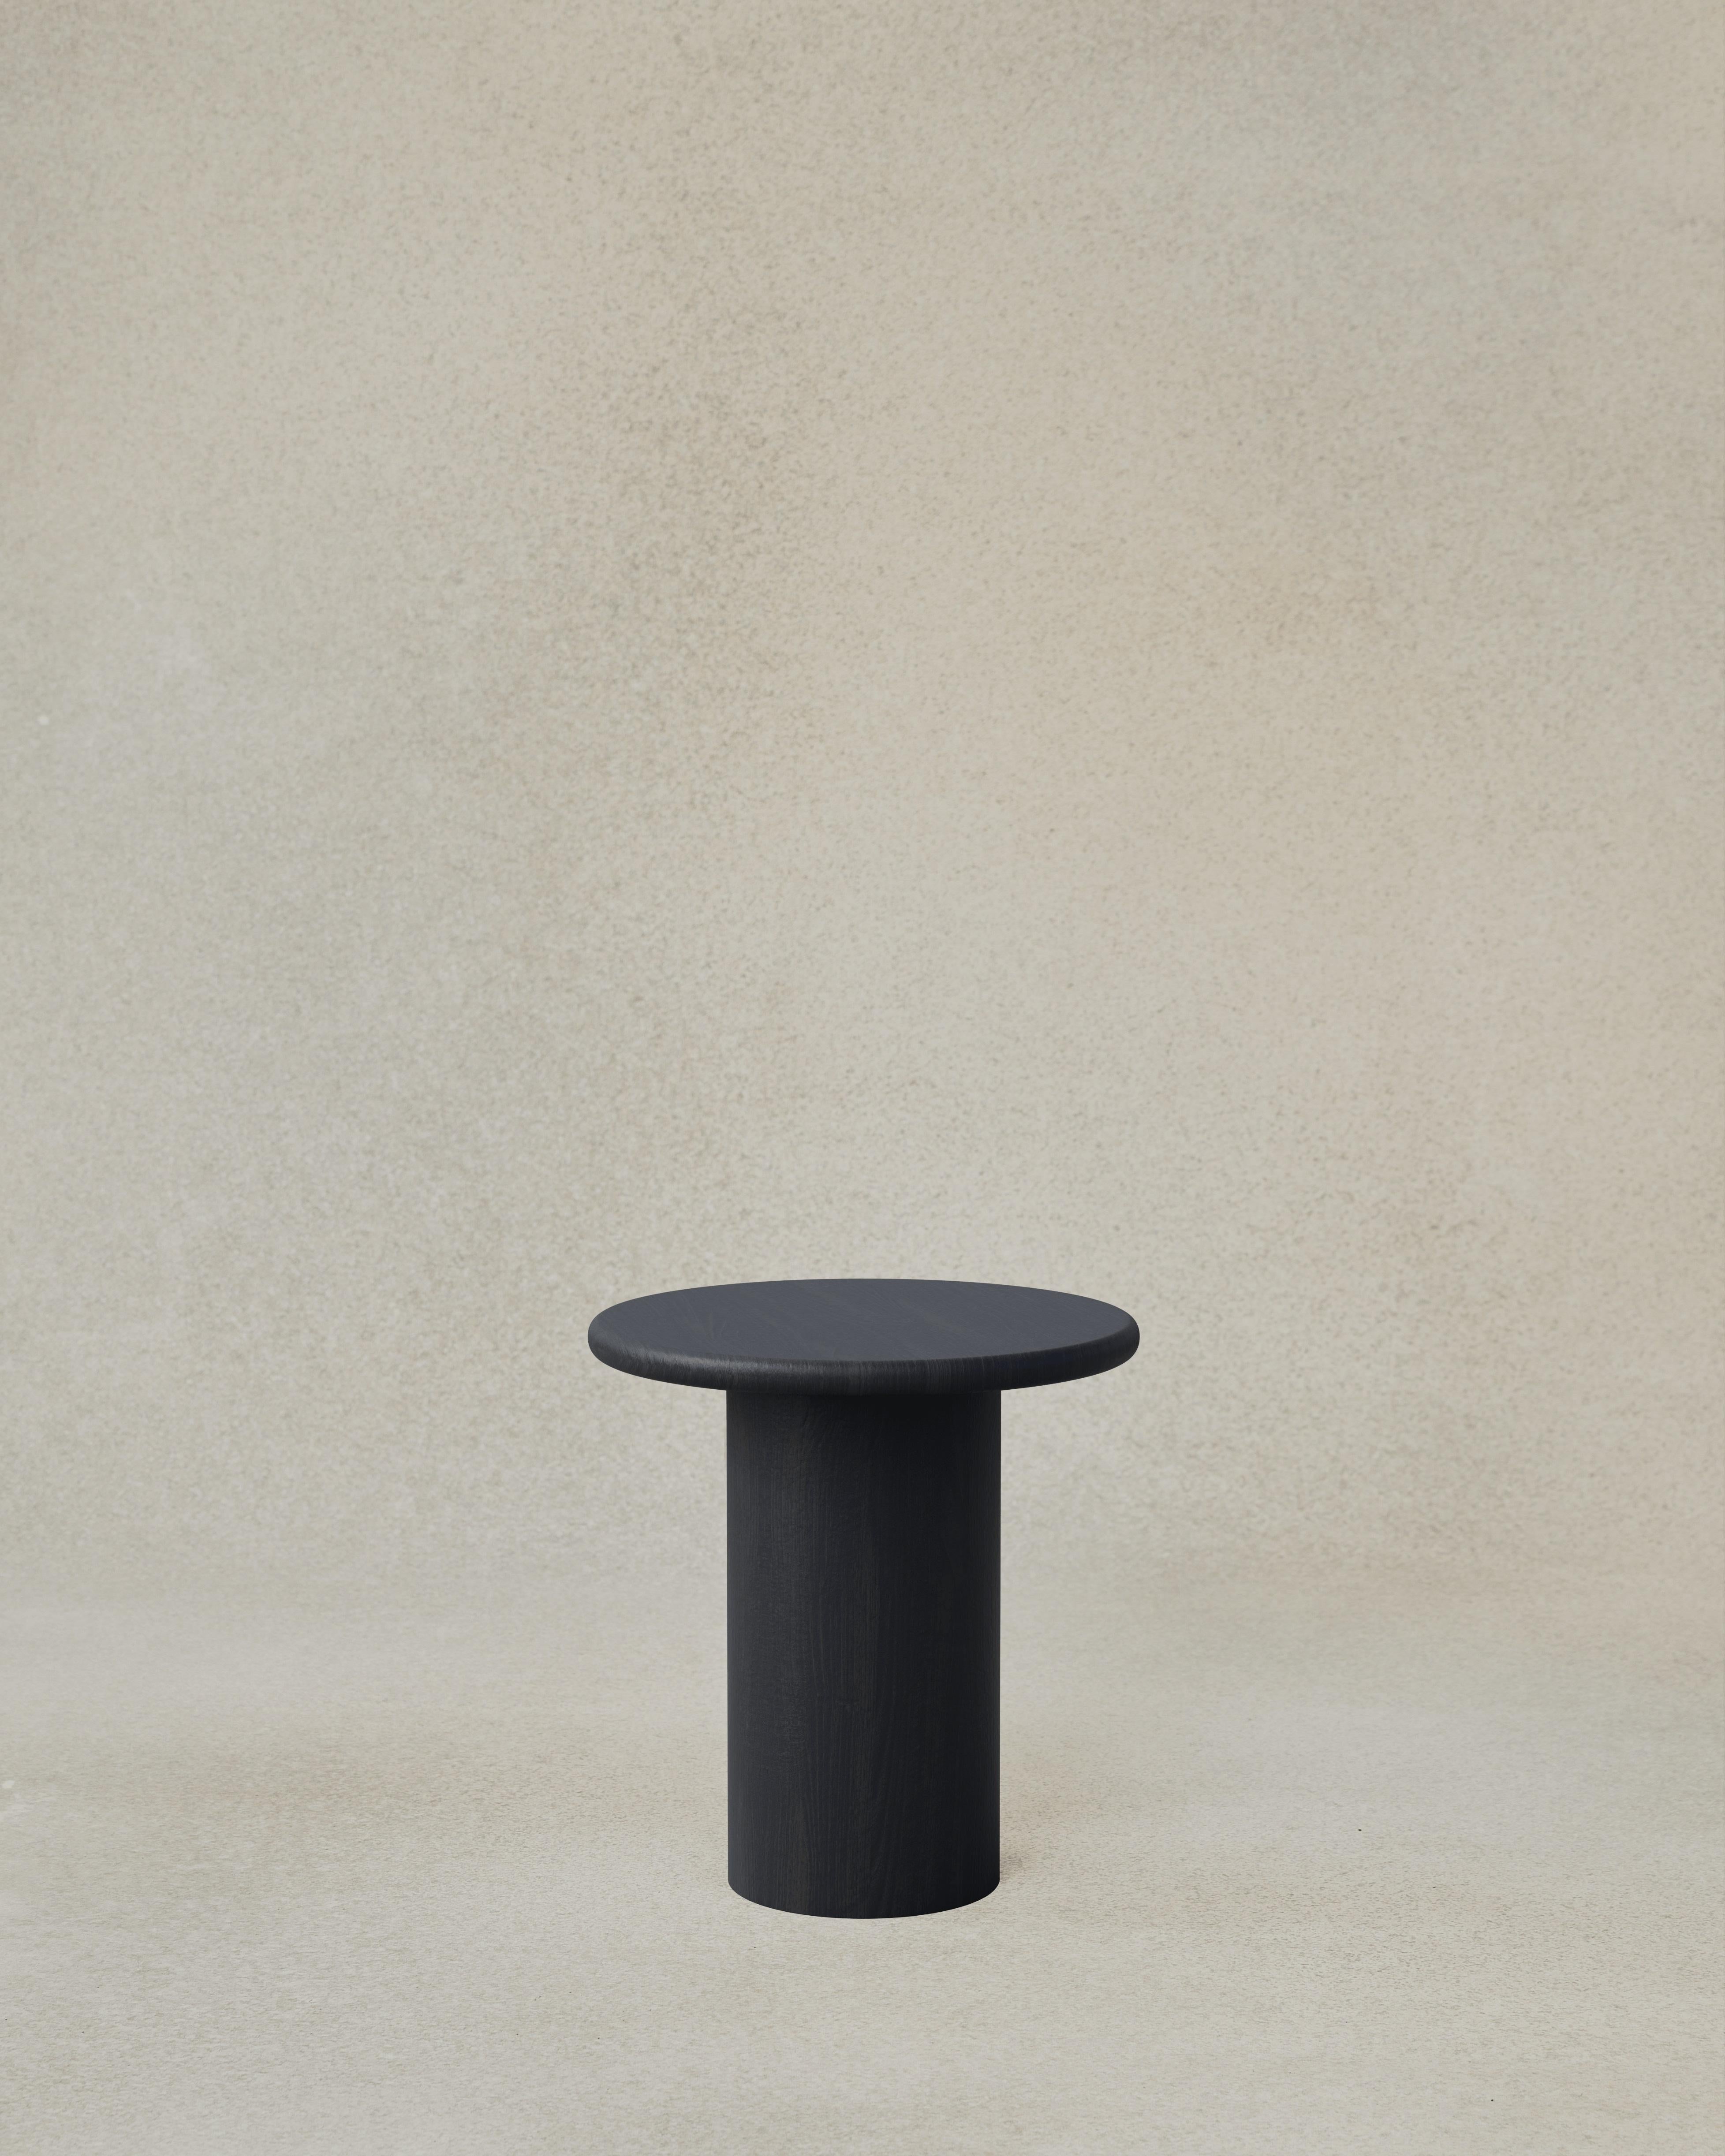 The Raindrop 400 is the second to smallest Side Table, perfect to pair with a 800 or 1000 Raindrop, and now available in a range of finishes to suit any interior or style. The raindrops nestle together to form a cascading series of tables in height